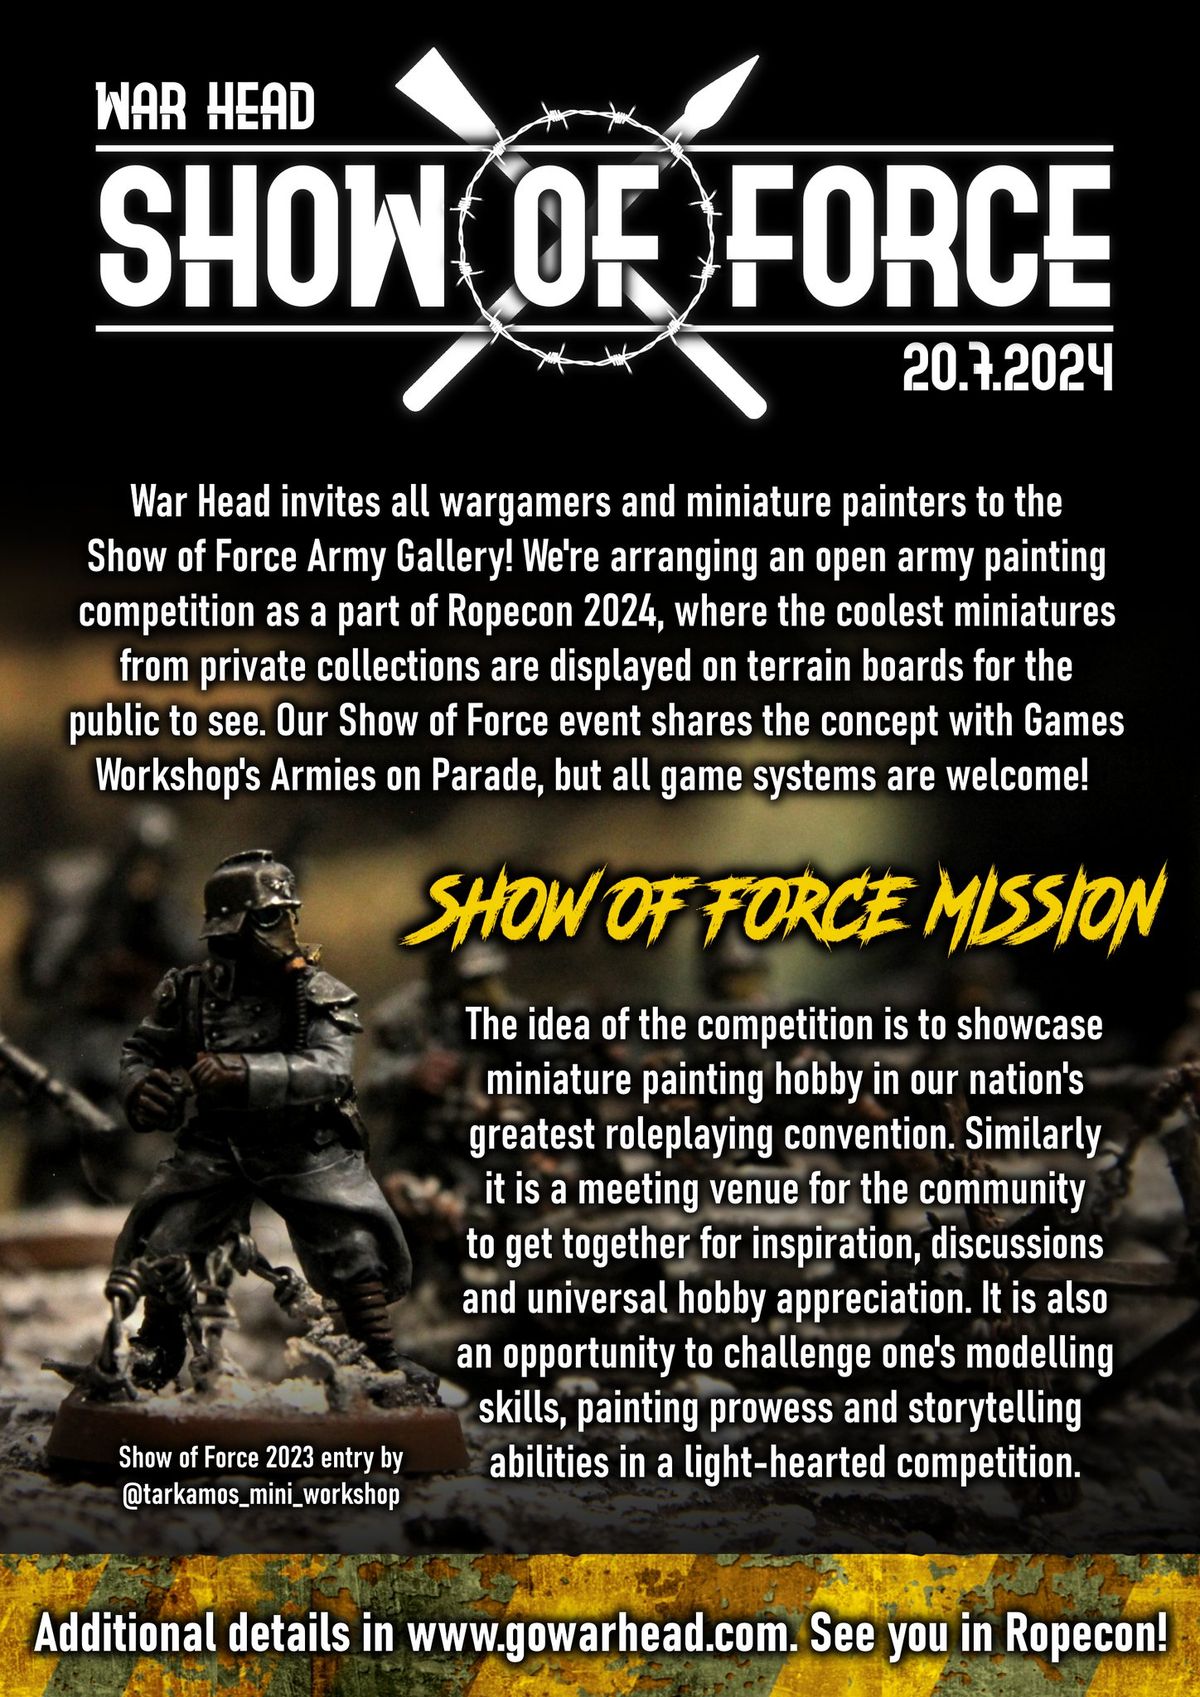 War Head Show of Force: Army Gallery and Painting Contest